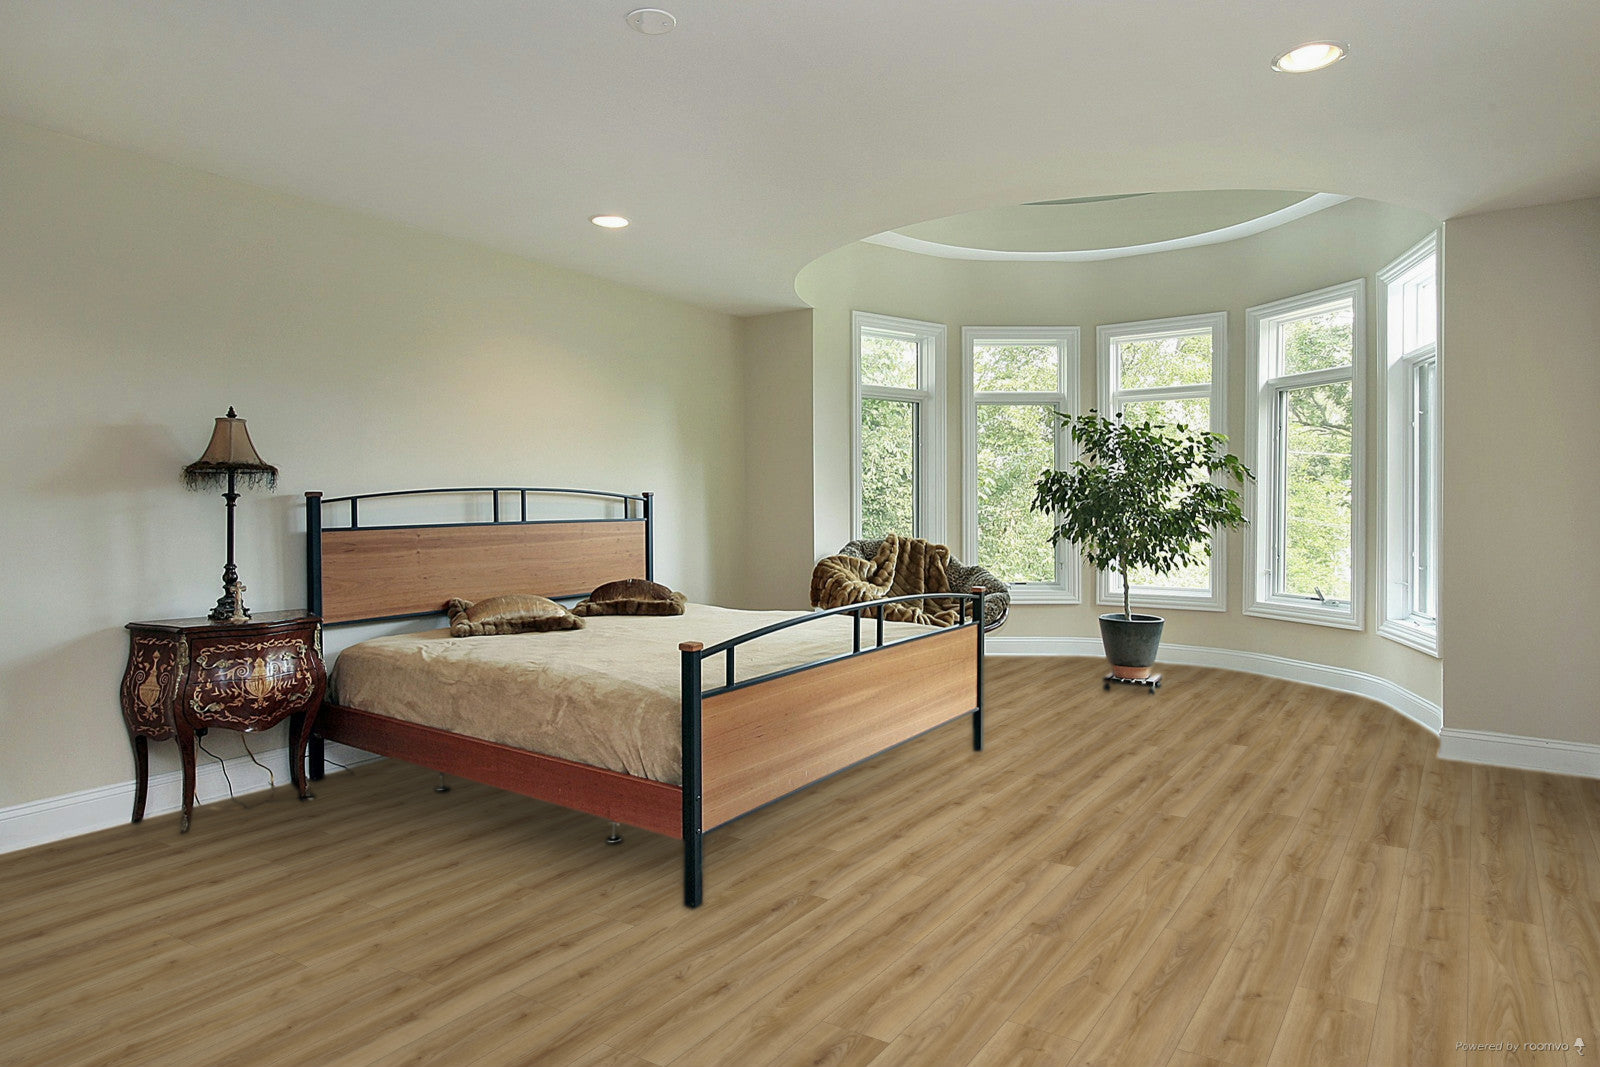 Engineered Floors - Wood Tech Collection - 7 in. x 54 in. - Birch Mountain